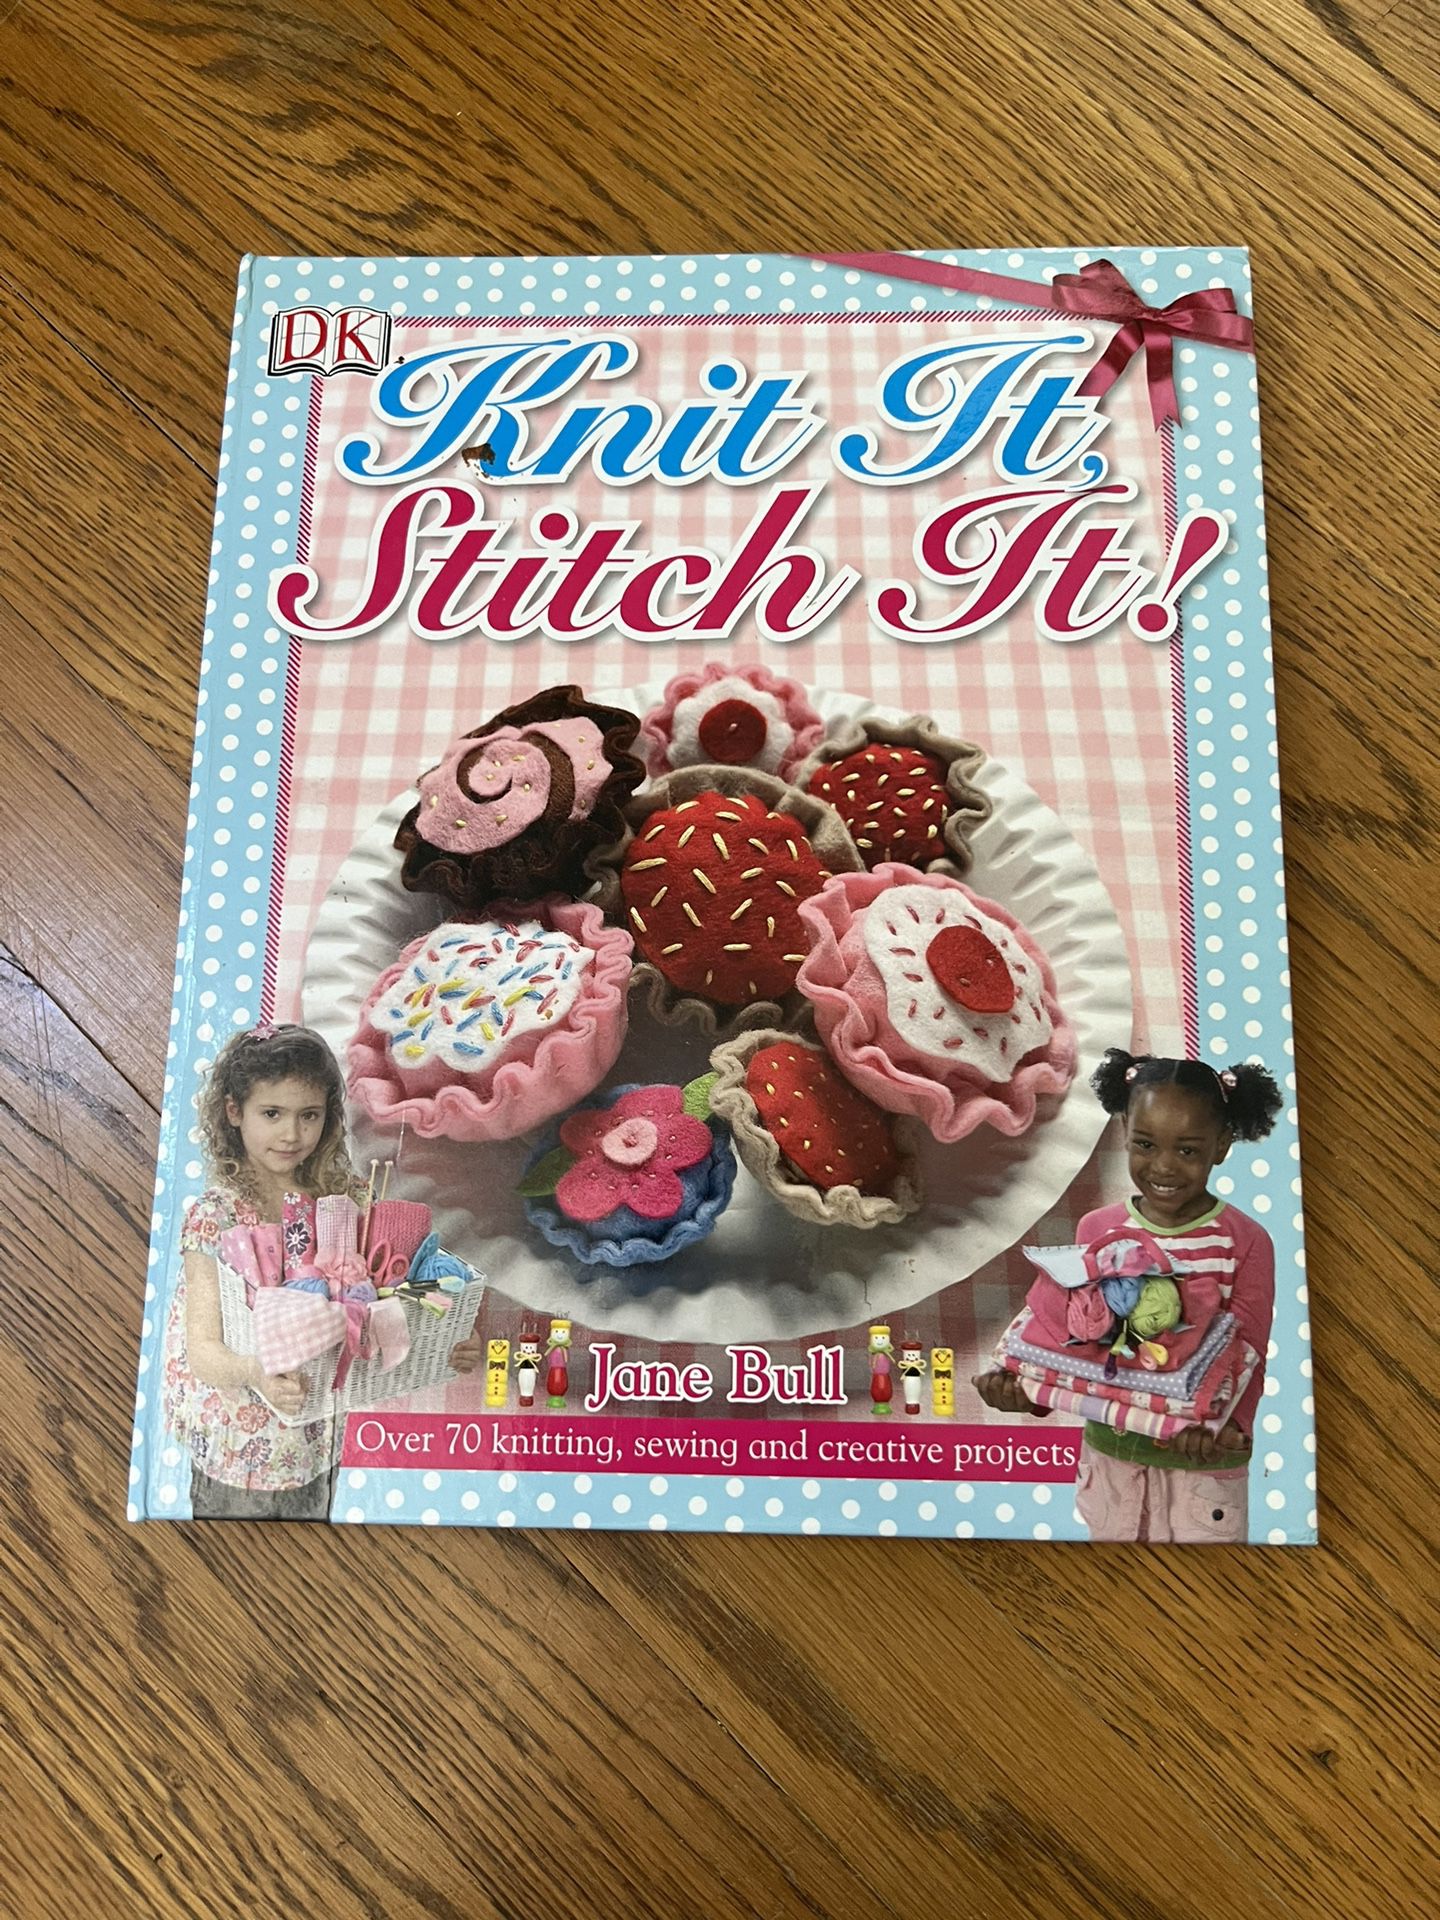 Book About Knitting For Children